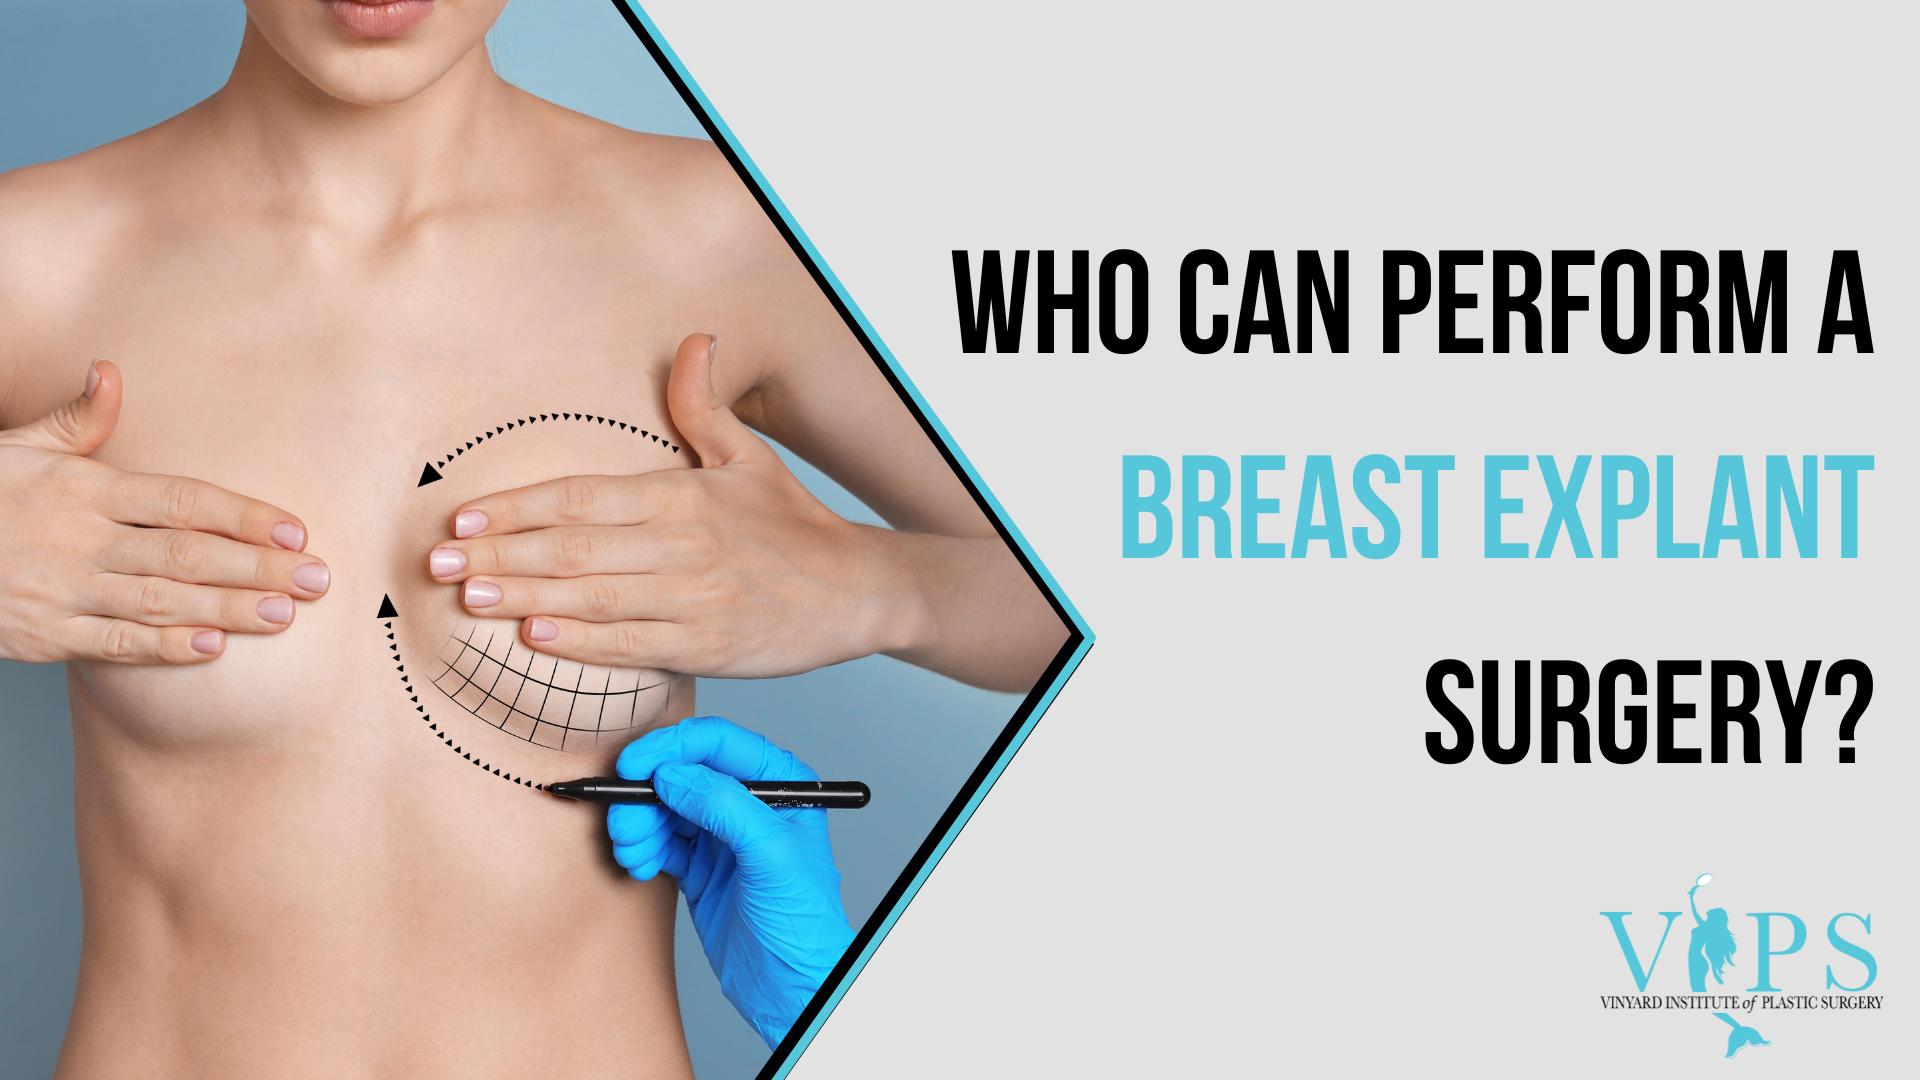 Who Can Perform a Breast Explant Surgery?